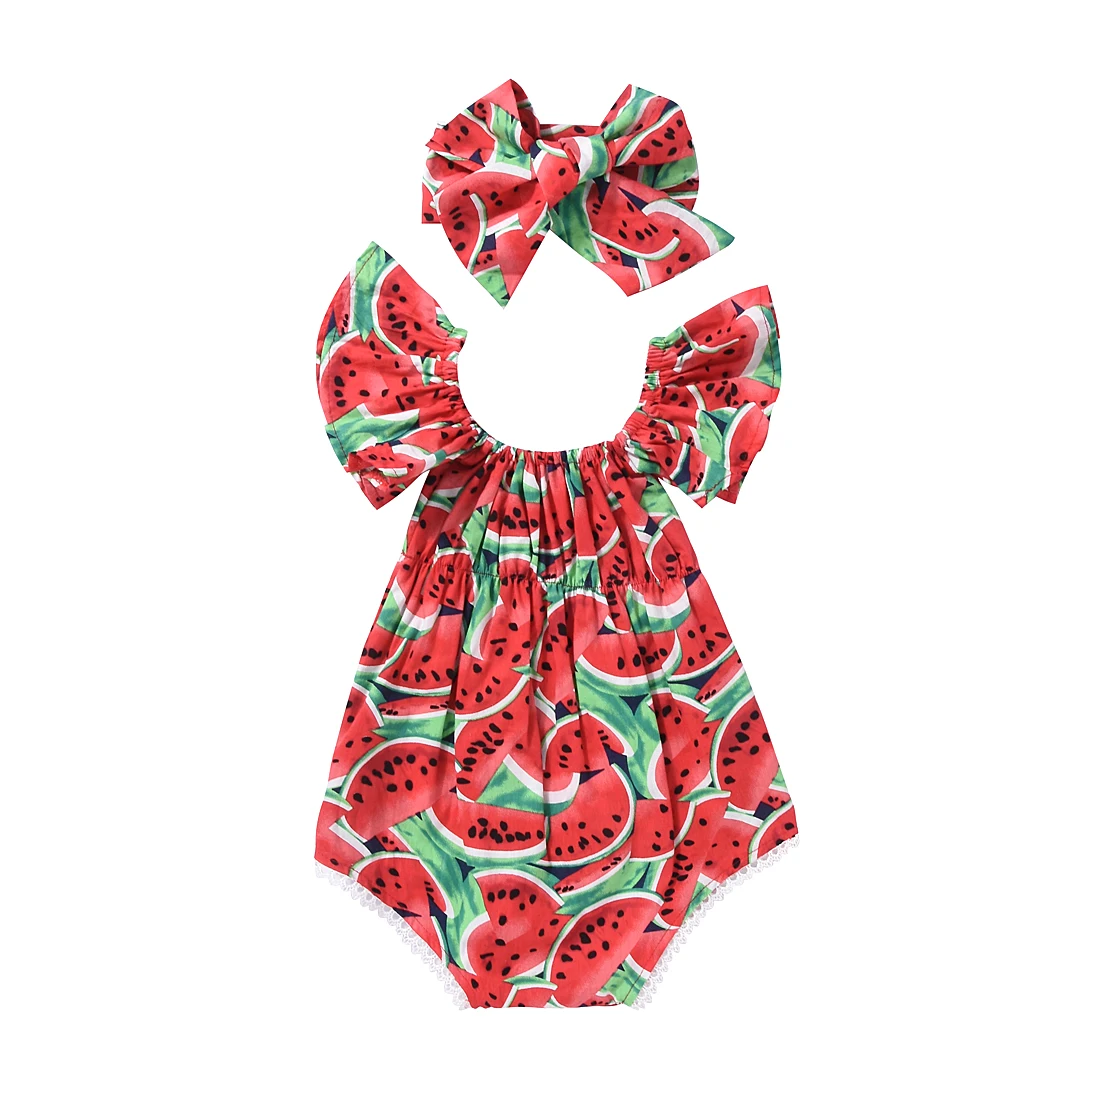 

Newborn Baby Girls Romper Clothes Infant Watermelon Clothing Bodysuit Jumpsuit Headband Bebes Girls Outfits Playsuit